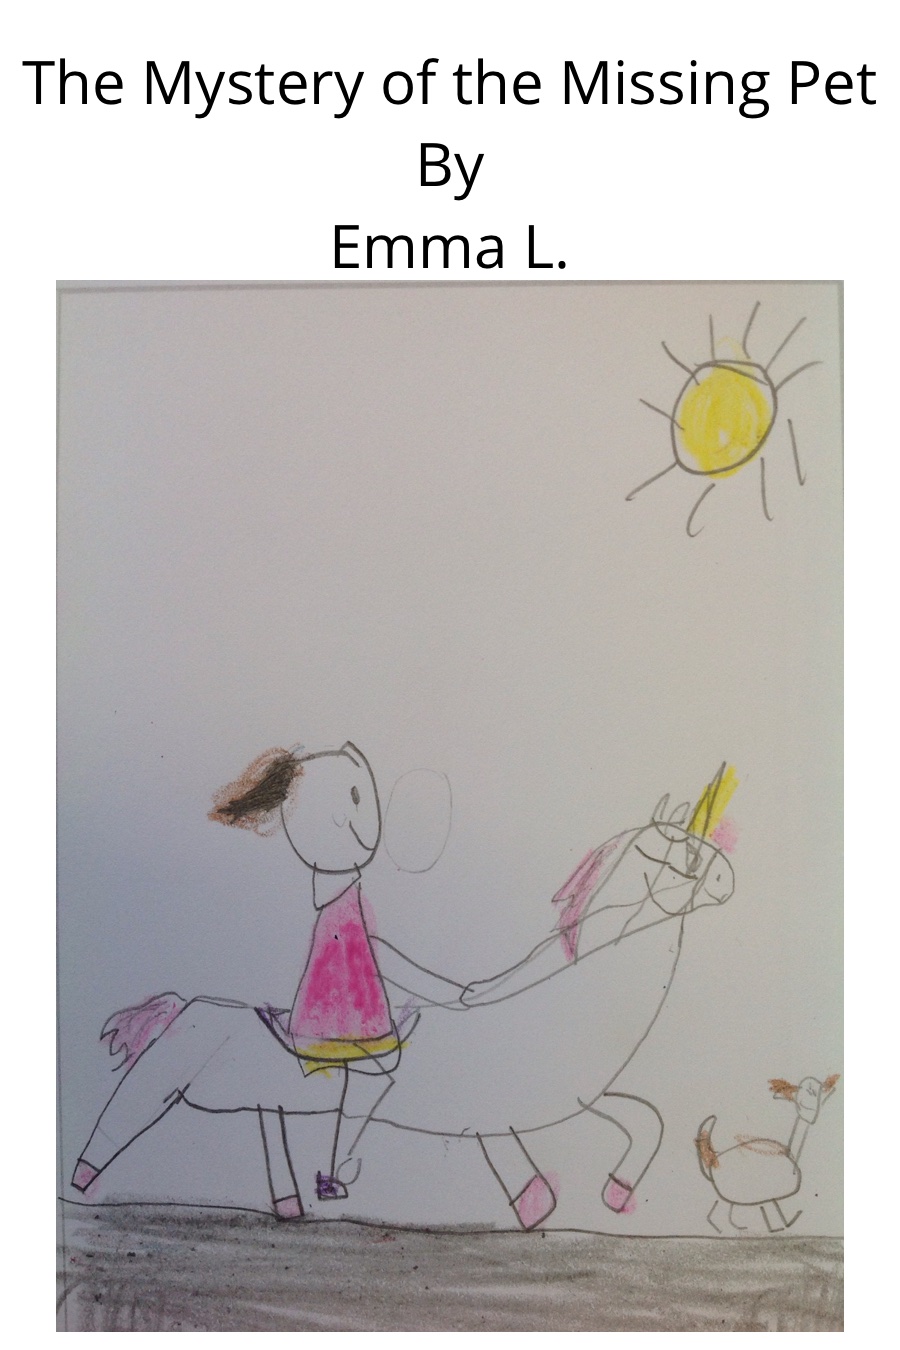 The Mystery of the Missing Pet by Emma L